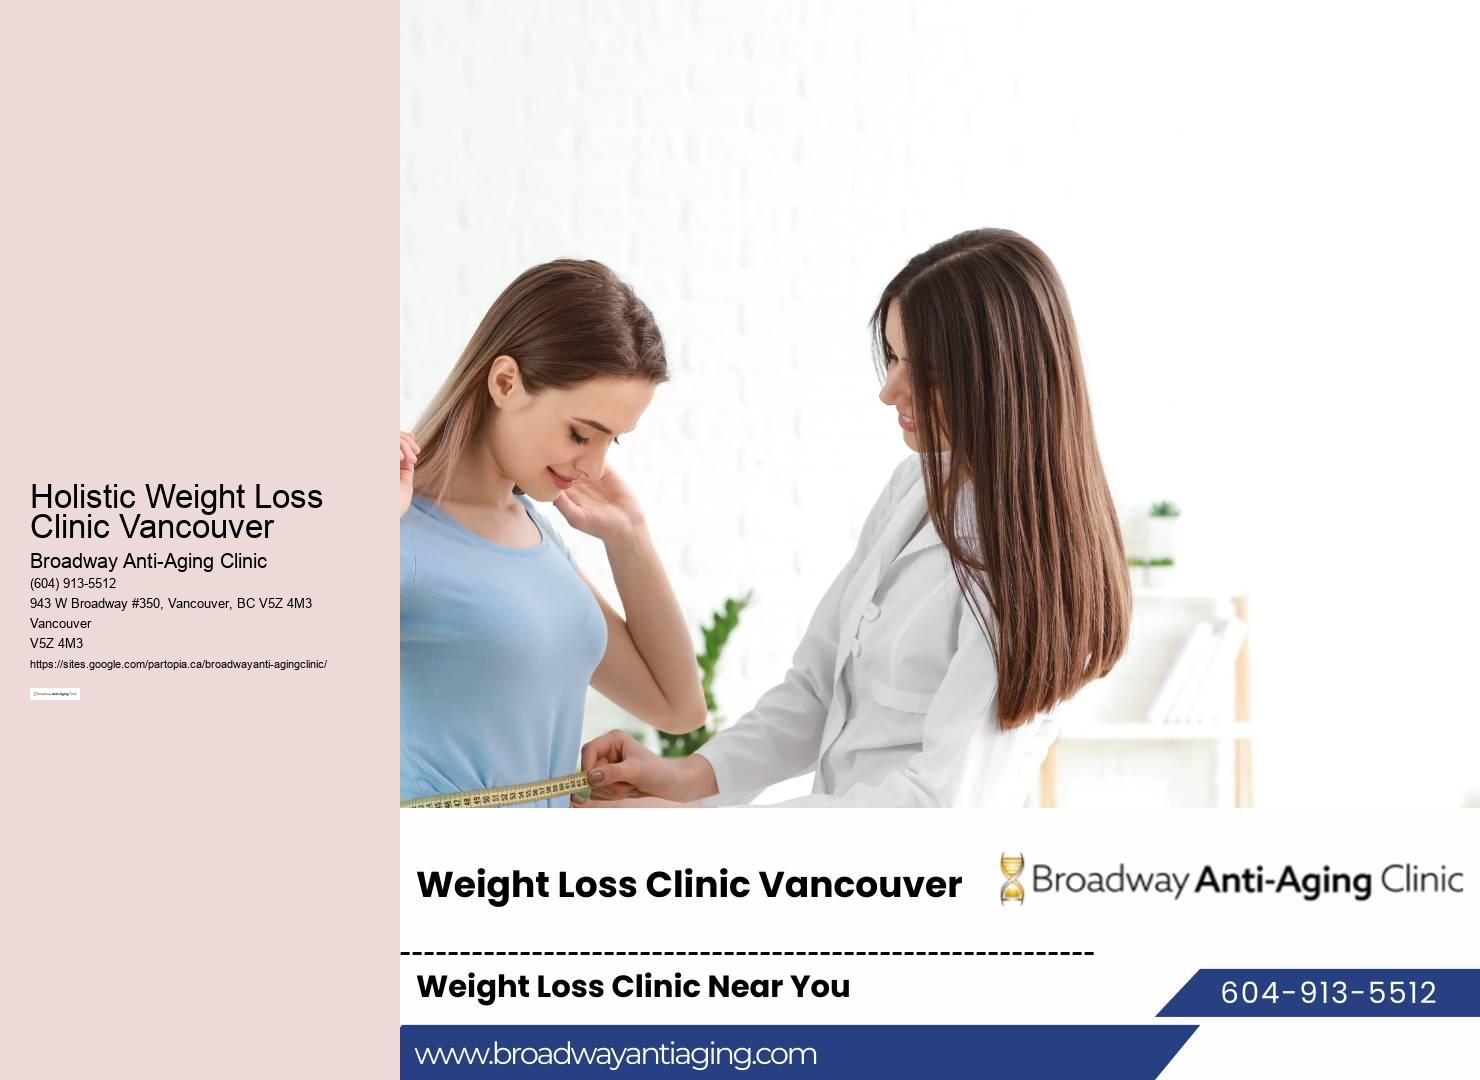 Holistic Weight Loss Clinic Vancouver